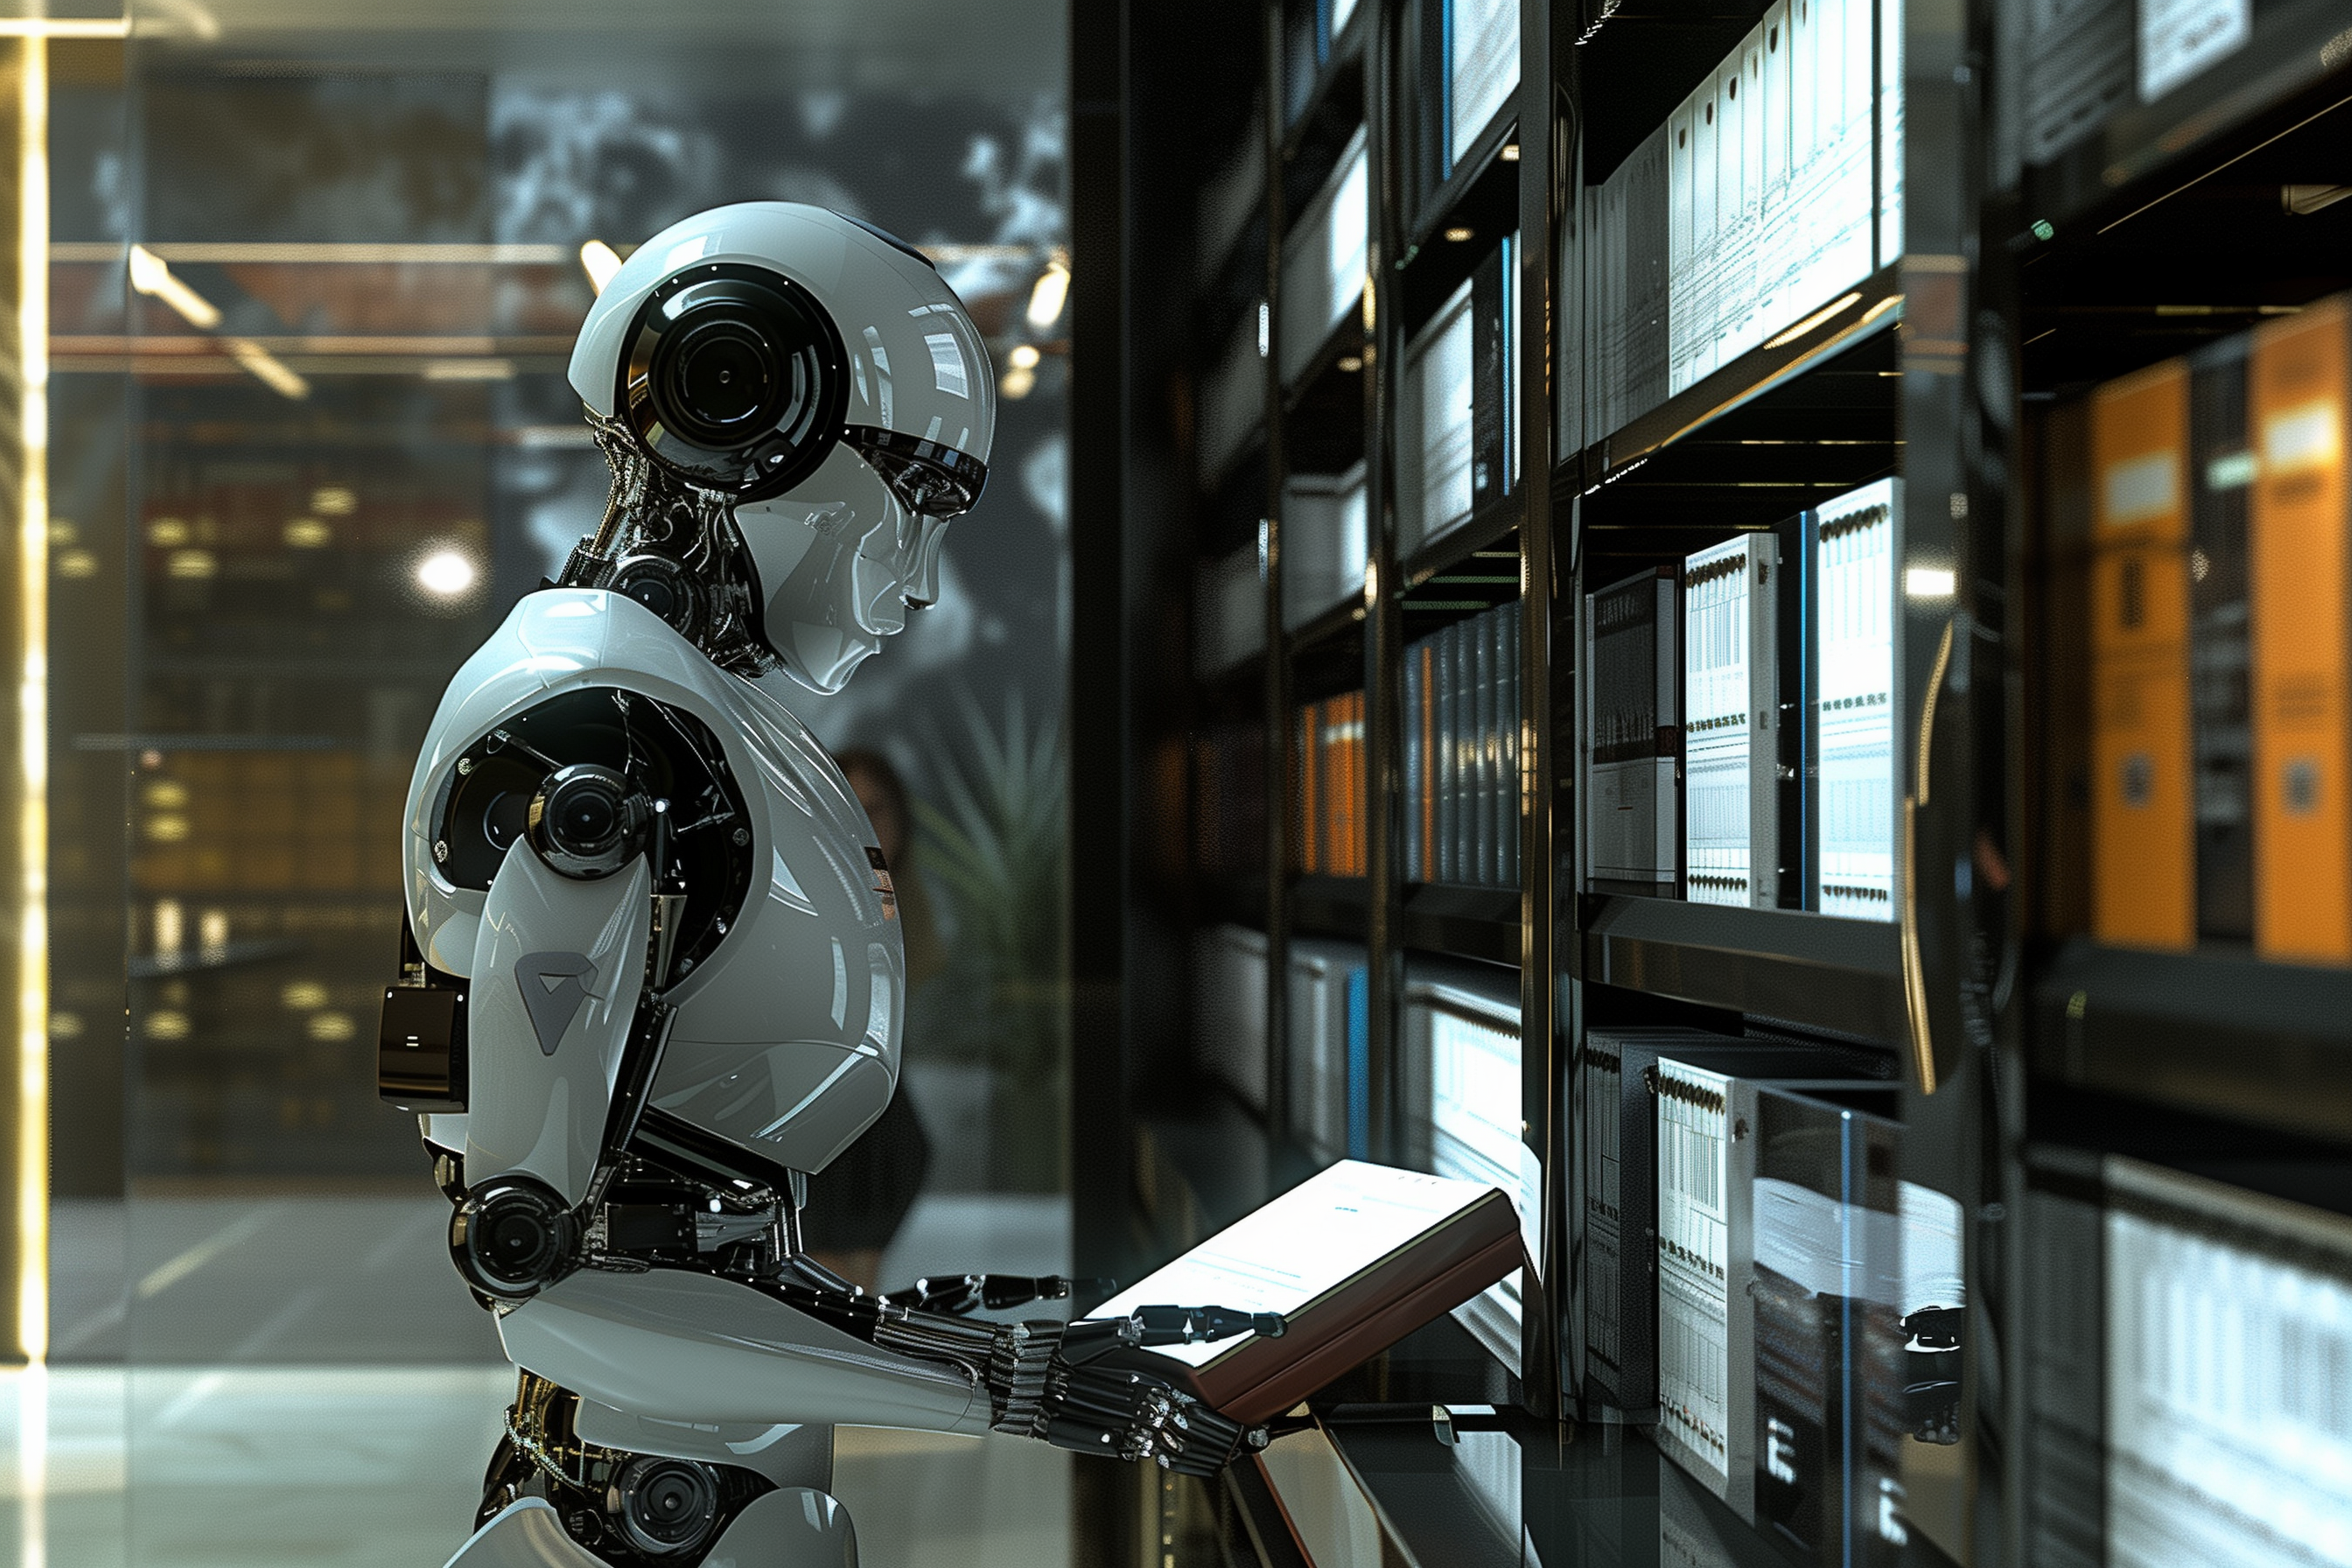 A robot librarian looking through a filing cabinet searching for files.